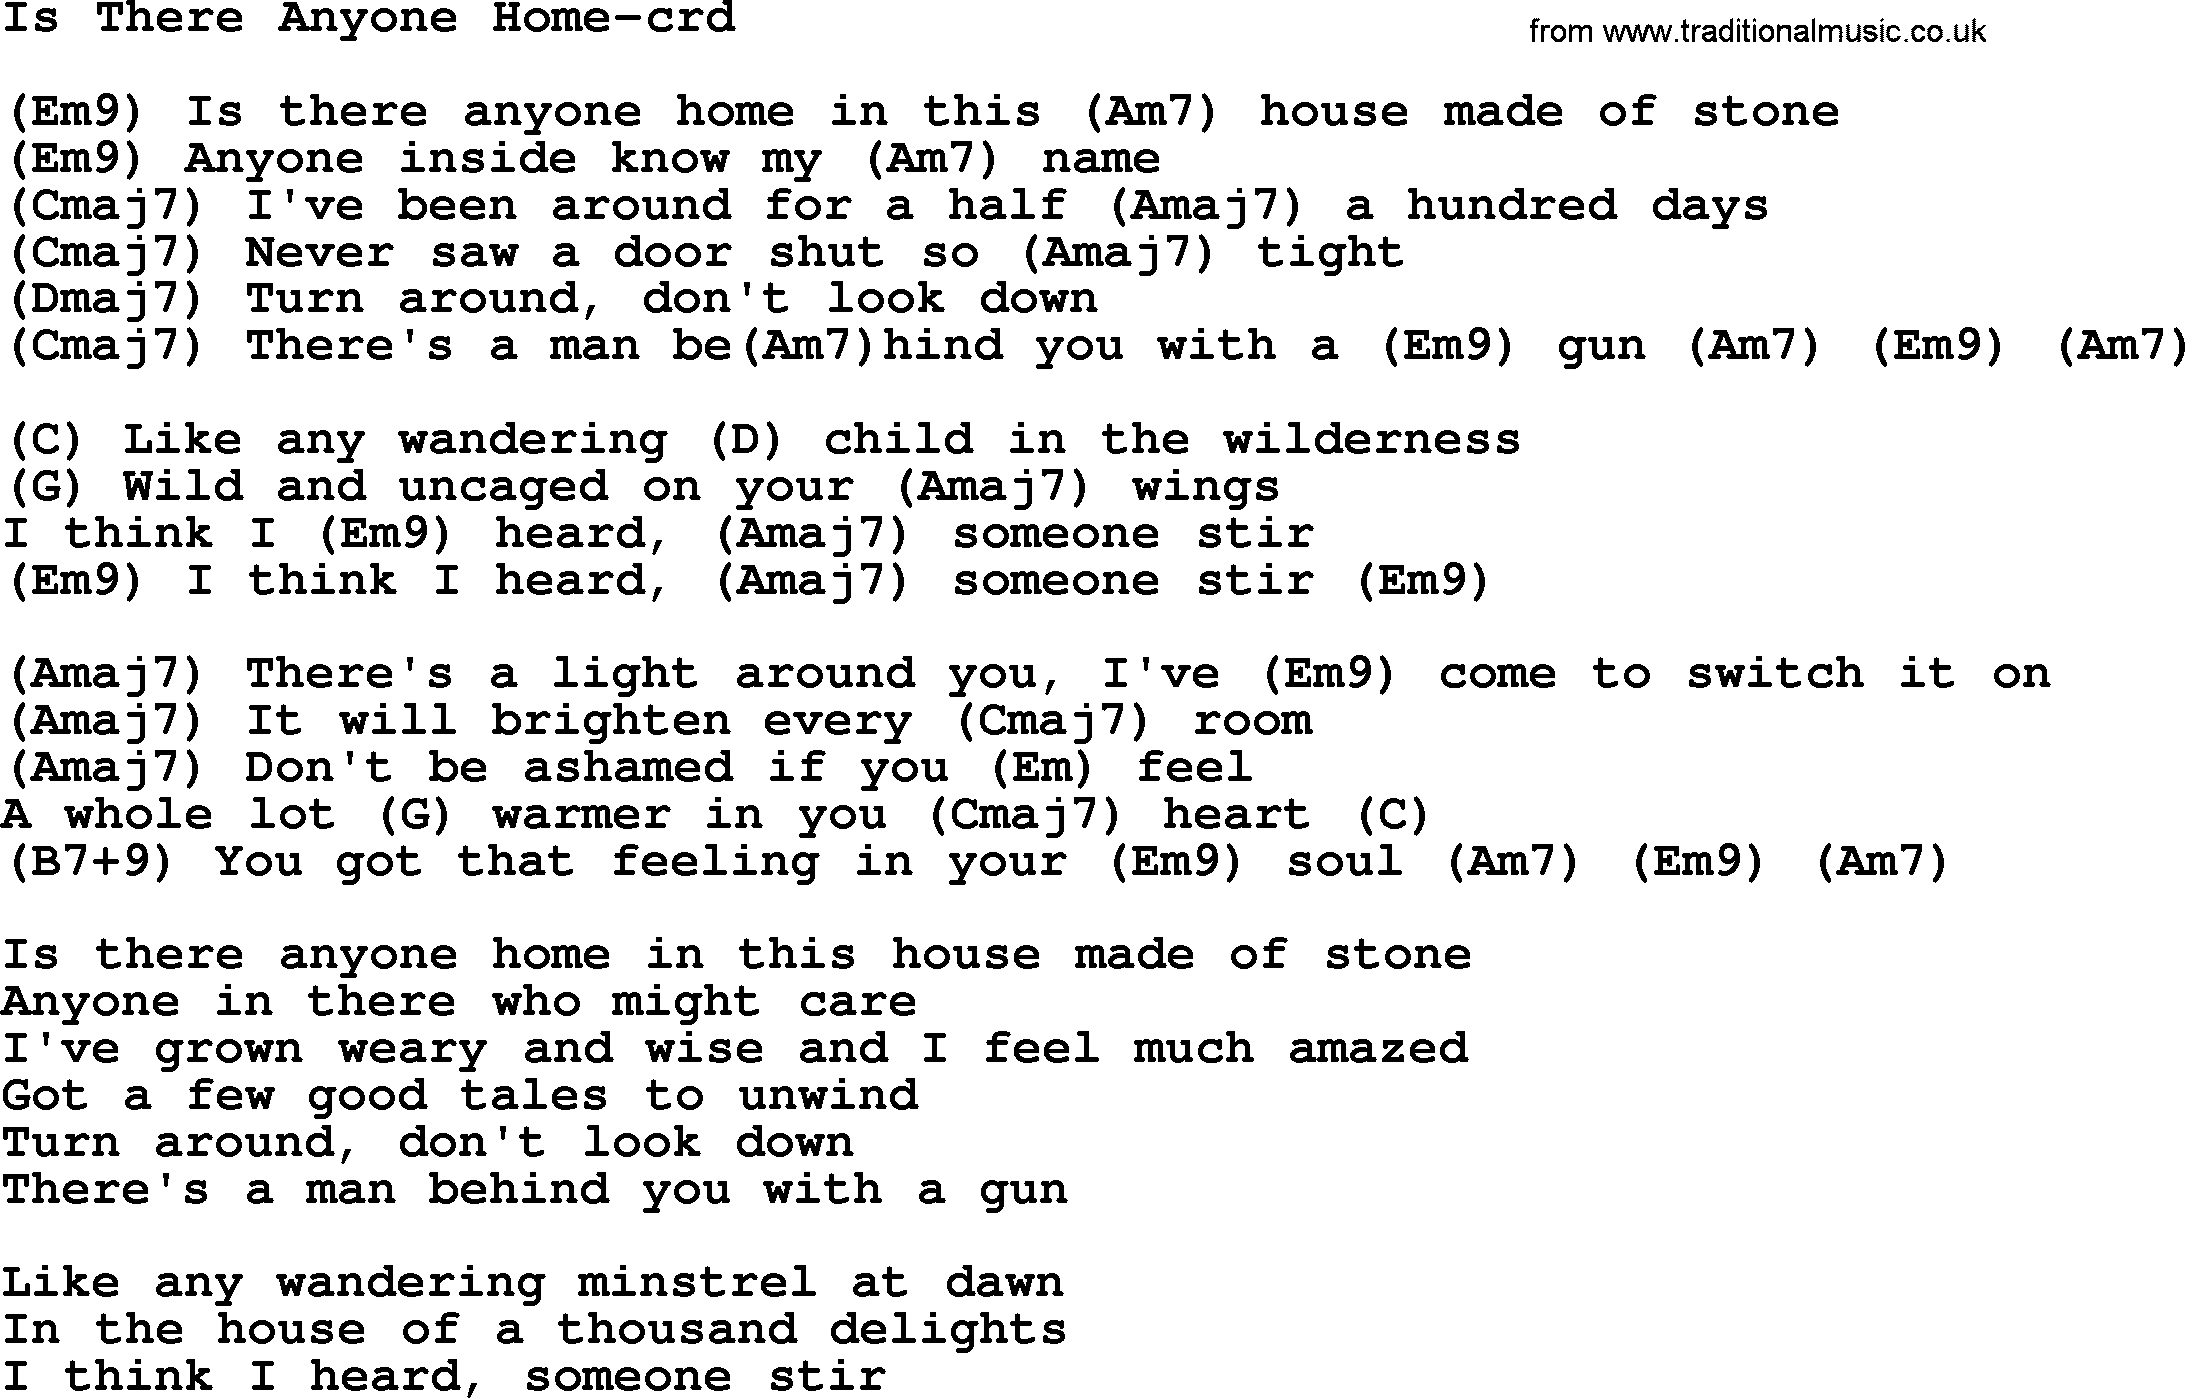 Gordon Lightfoot song Is There Anyone Home, lyrics and chords